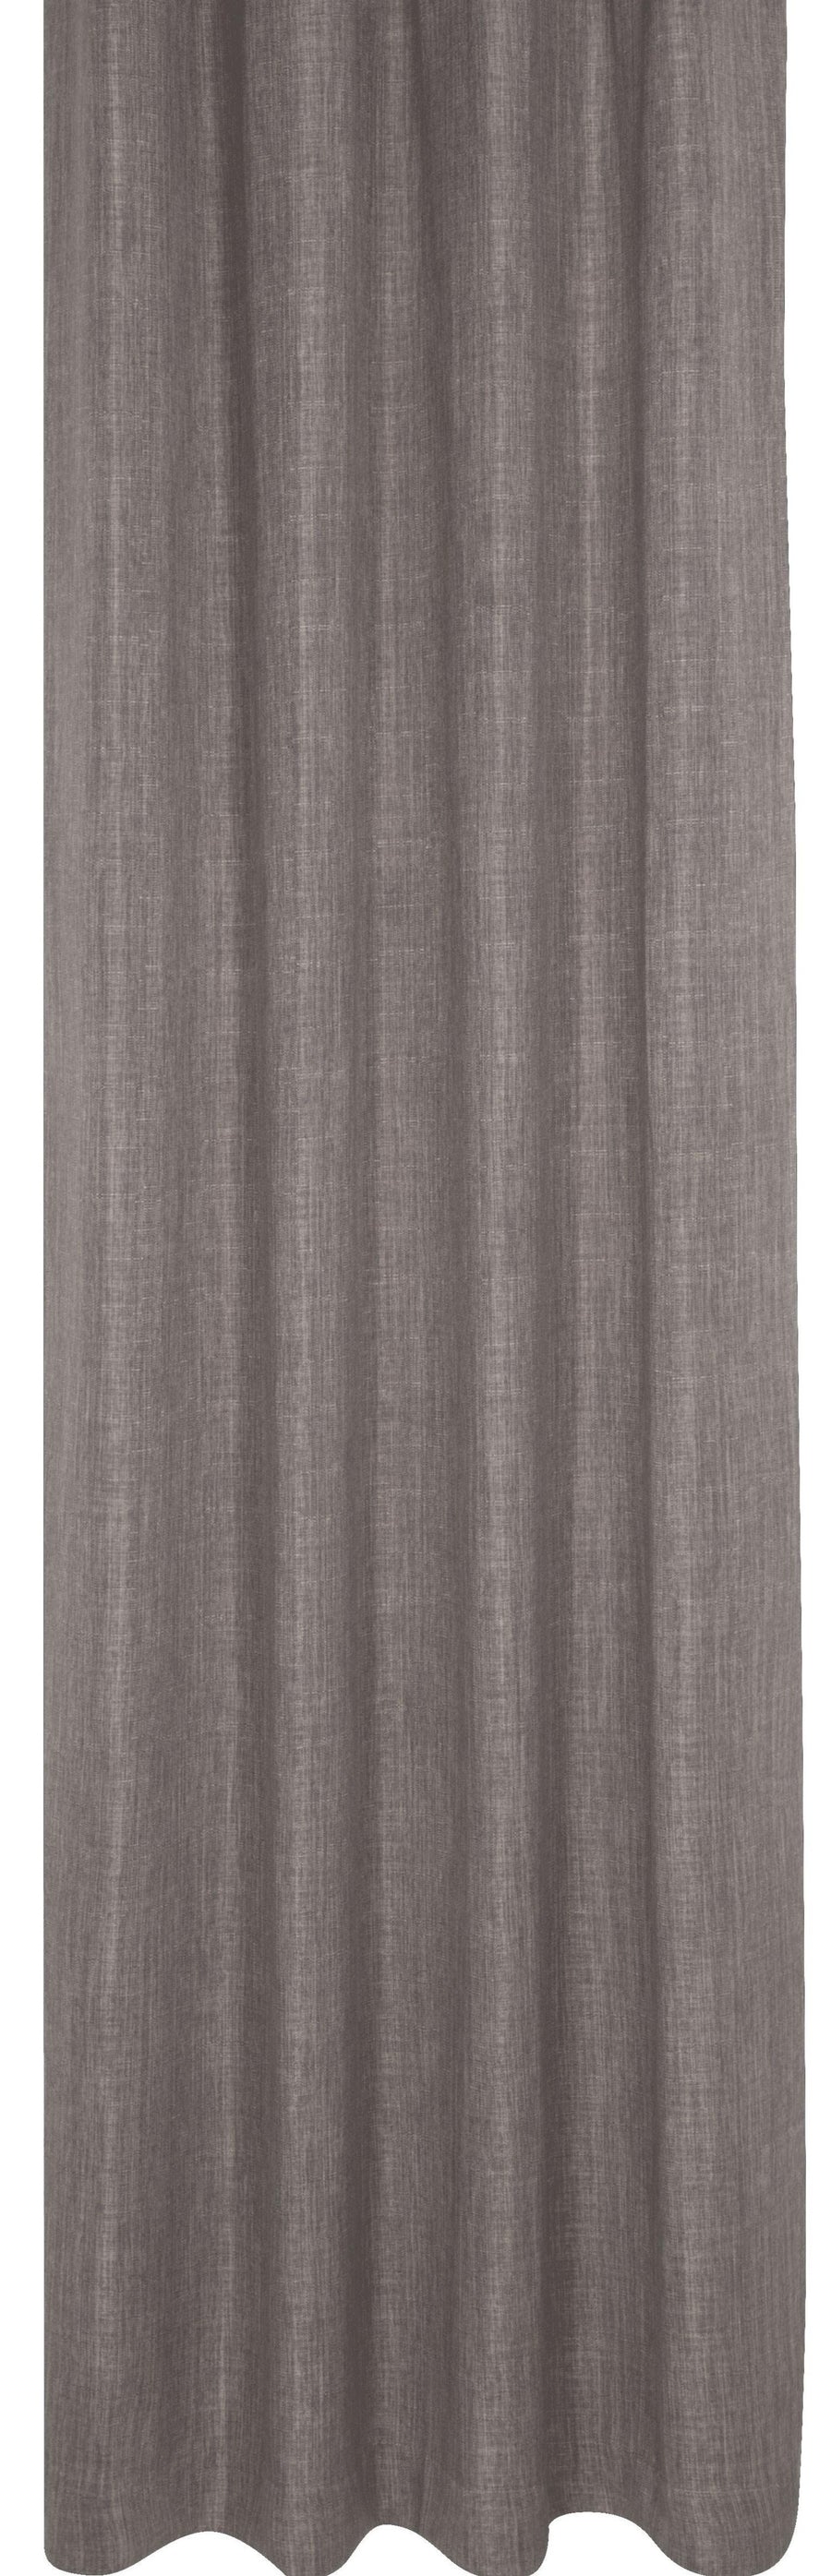 Charm Lined Curtains : Taped - Westpoint